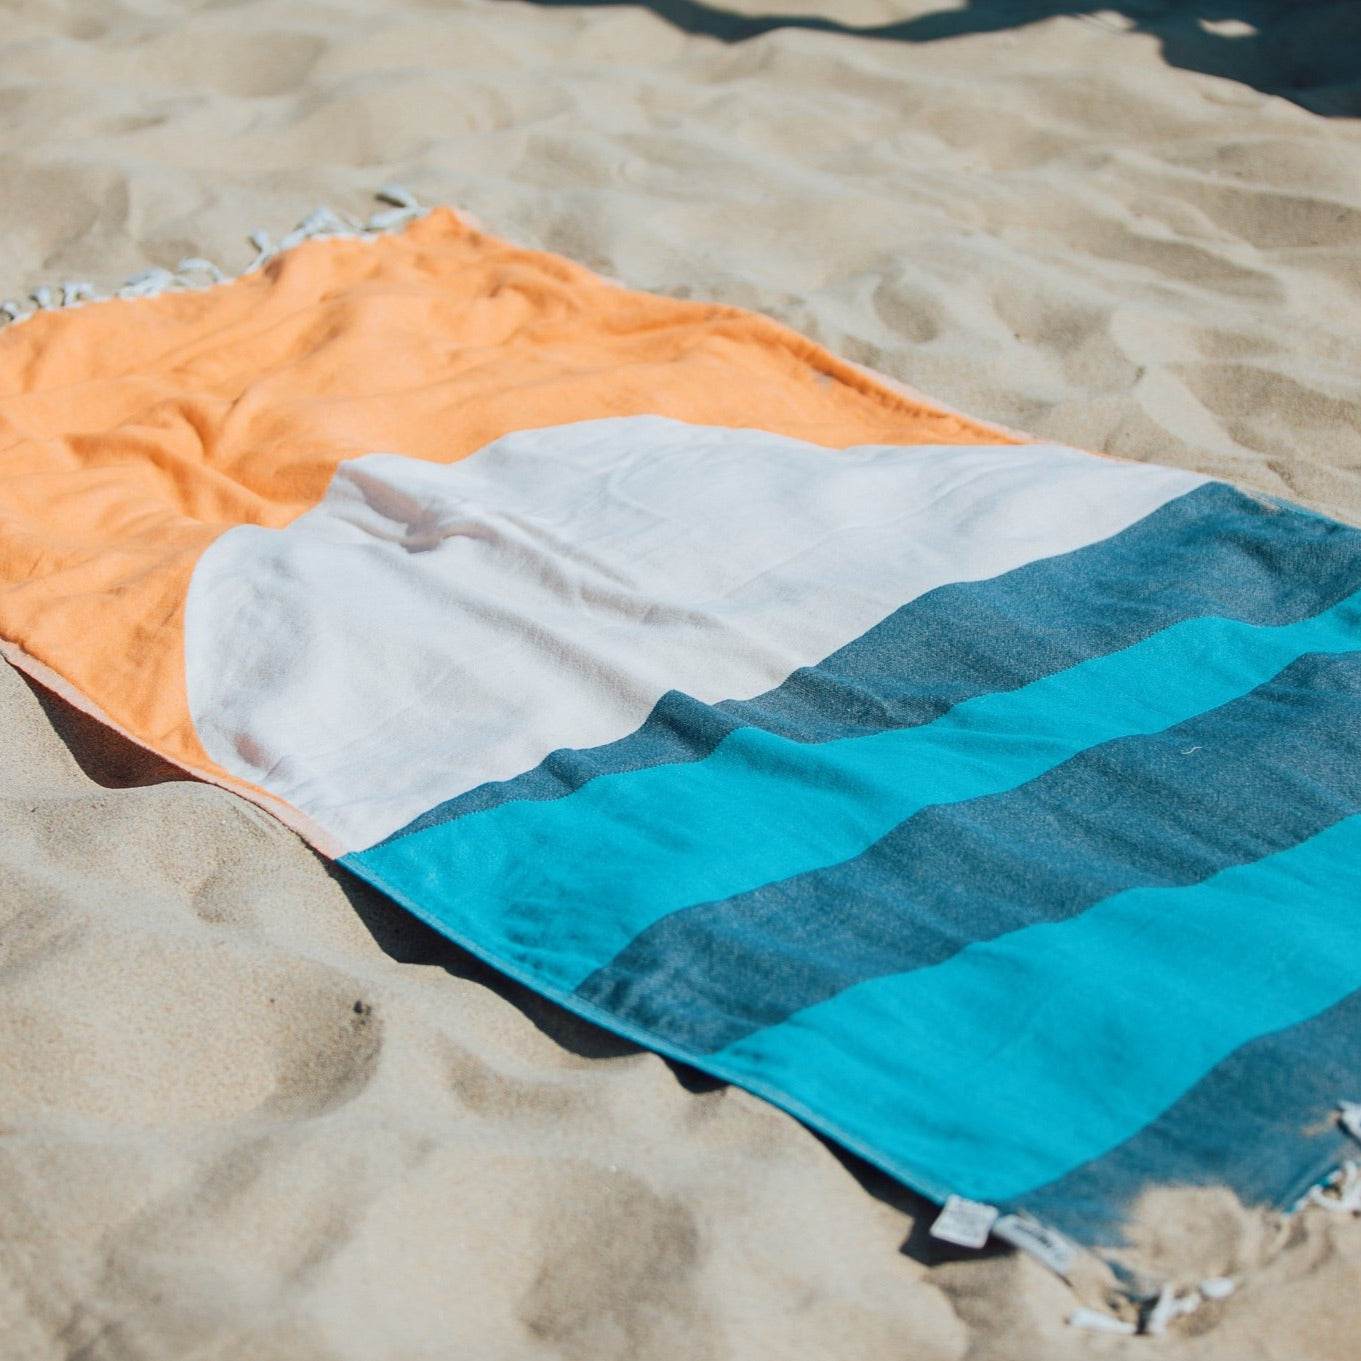 Detail of beach towel in the sand.